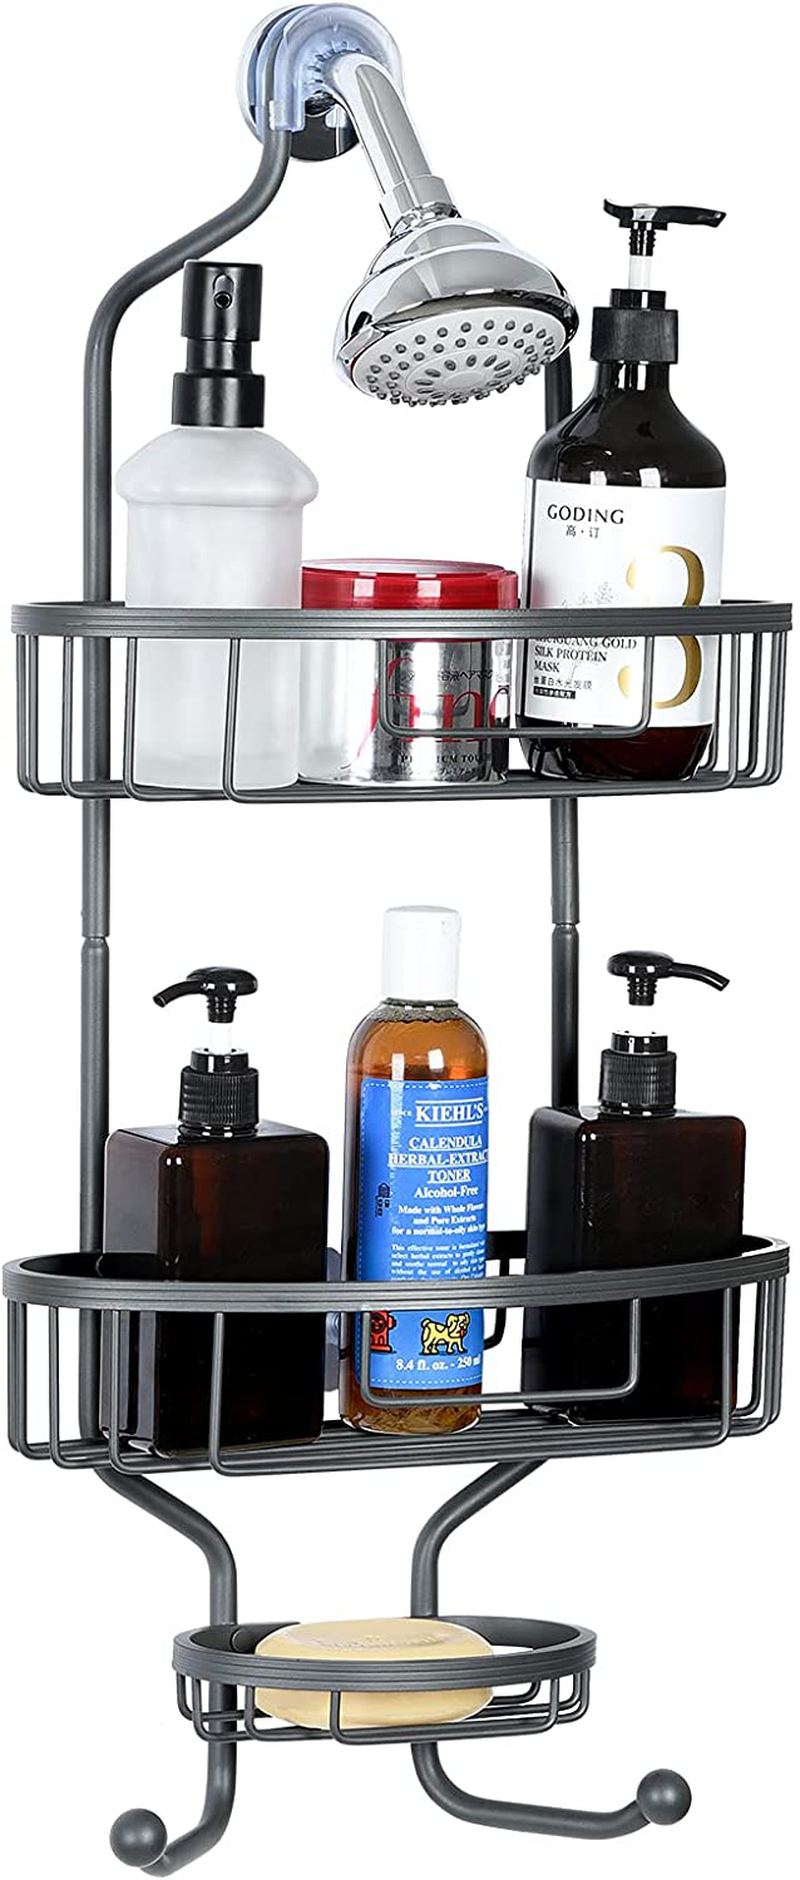 Hanging Shower Caddy, Vuskly Bathroom Shower Rack Over Shower Head,3-Tier  Aluminum Shower Organizer with Basket for Soap and 2 Hooks Extra Wide Space  for Shampoo,Conditioner,Gray 11 x 5 x 25 : 